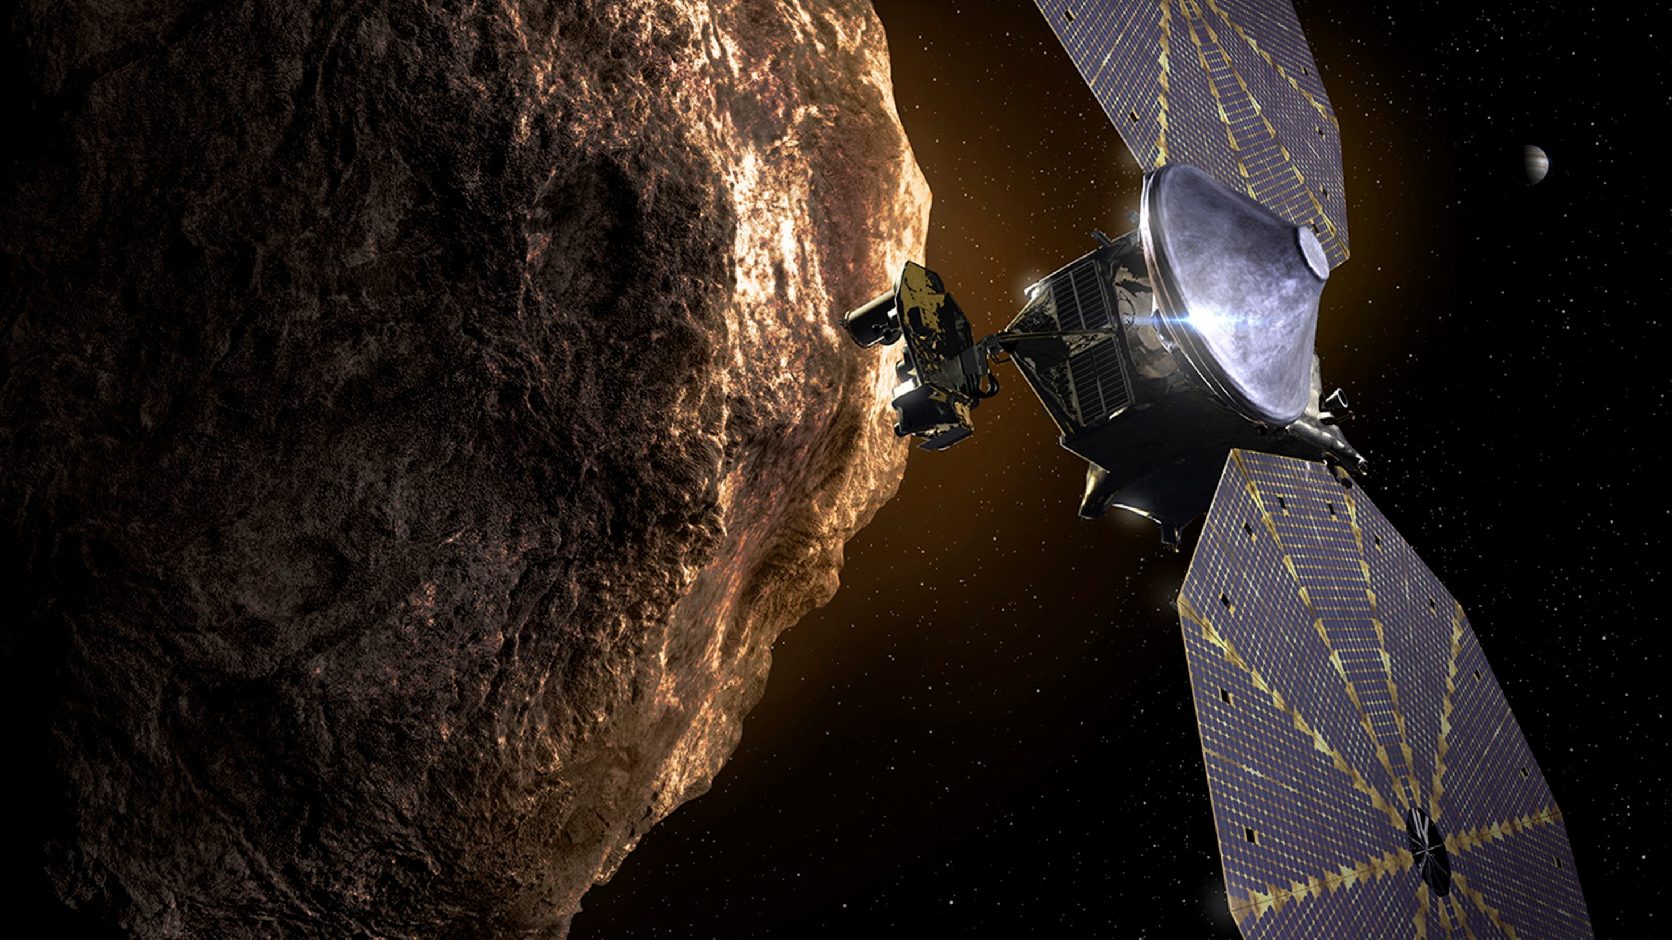 NASA is following in the footsteps of Jupiter's asteroids